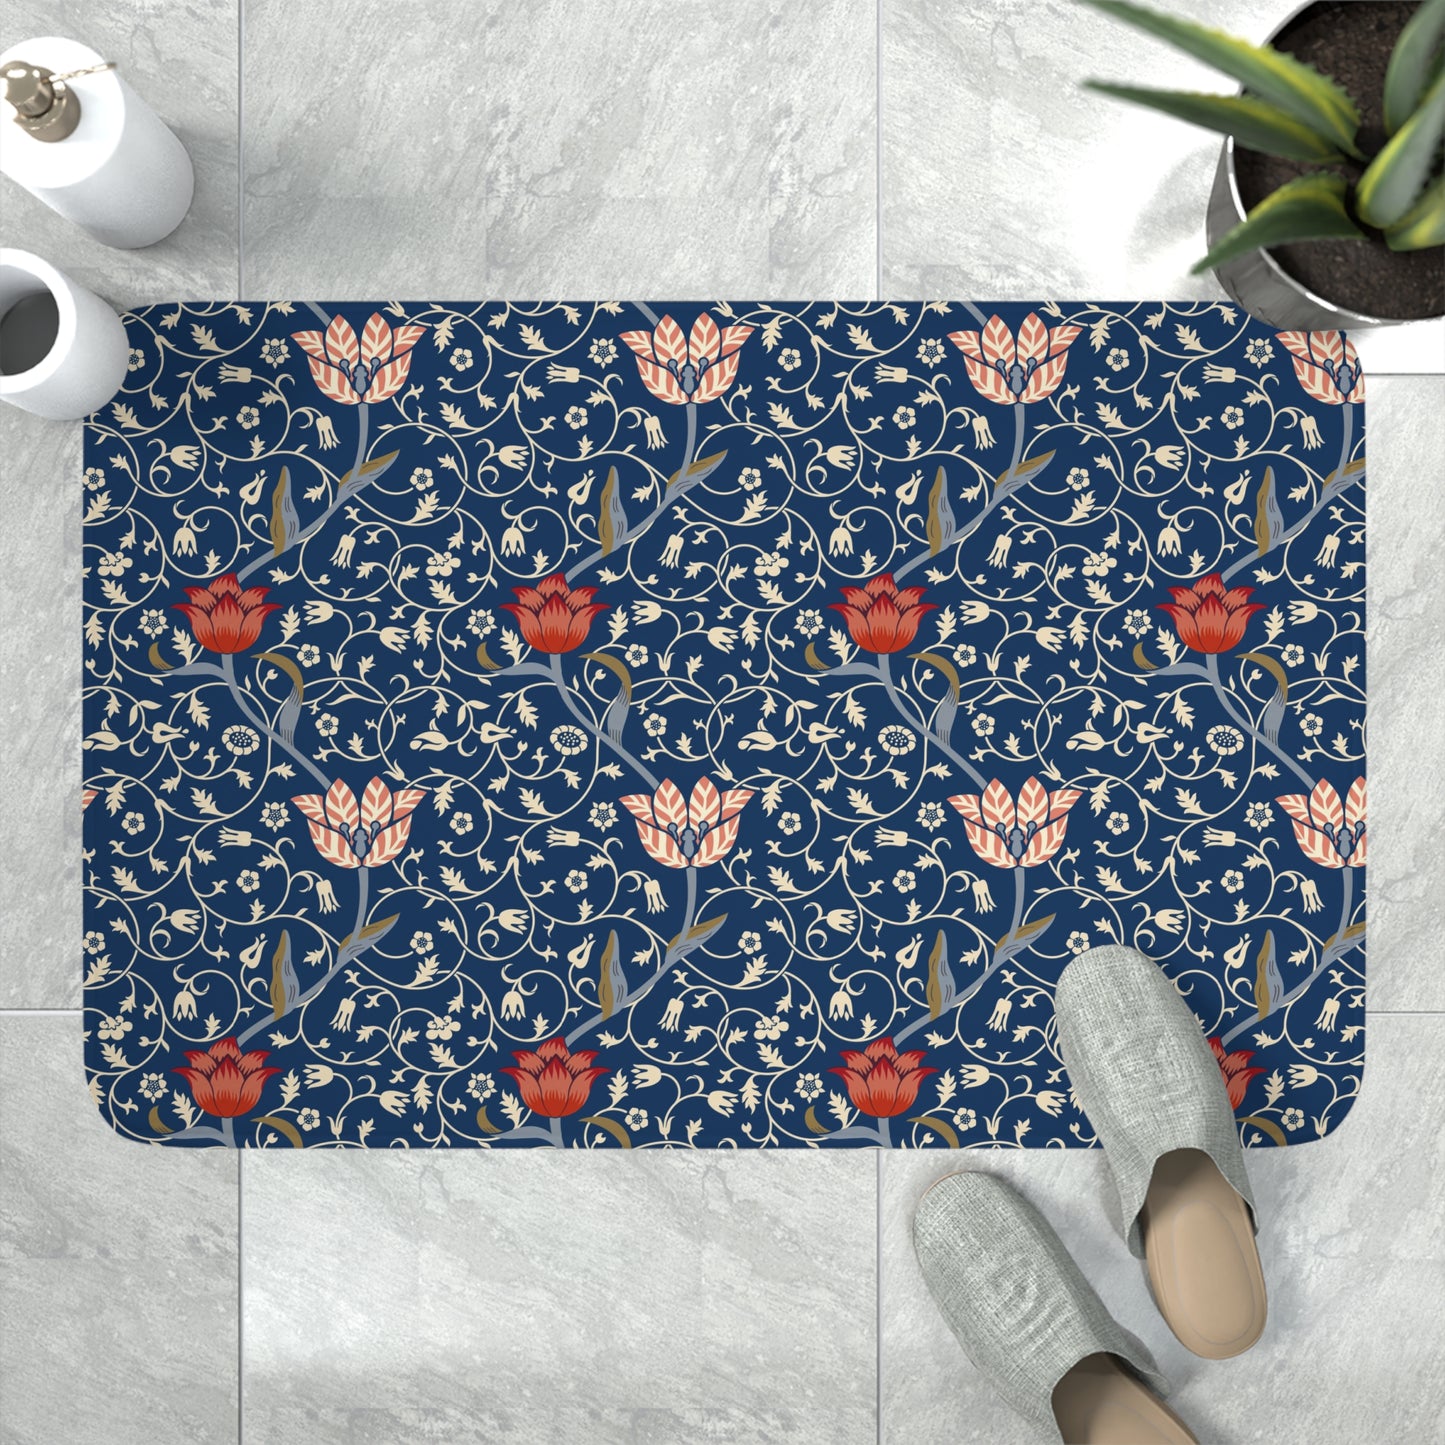 william-morris-amp-co-memory-foam-bath-mat-medway-collection-1